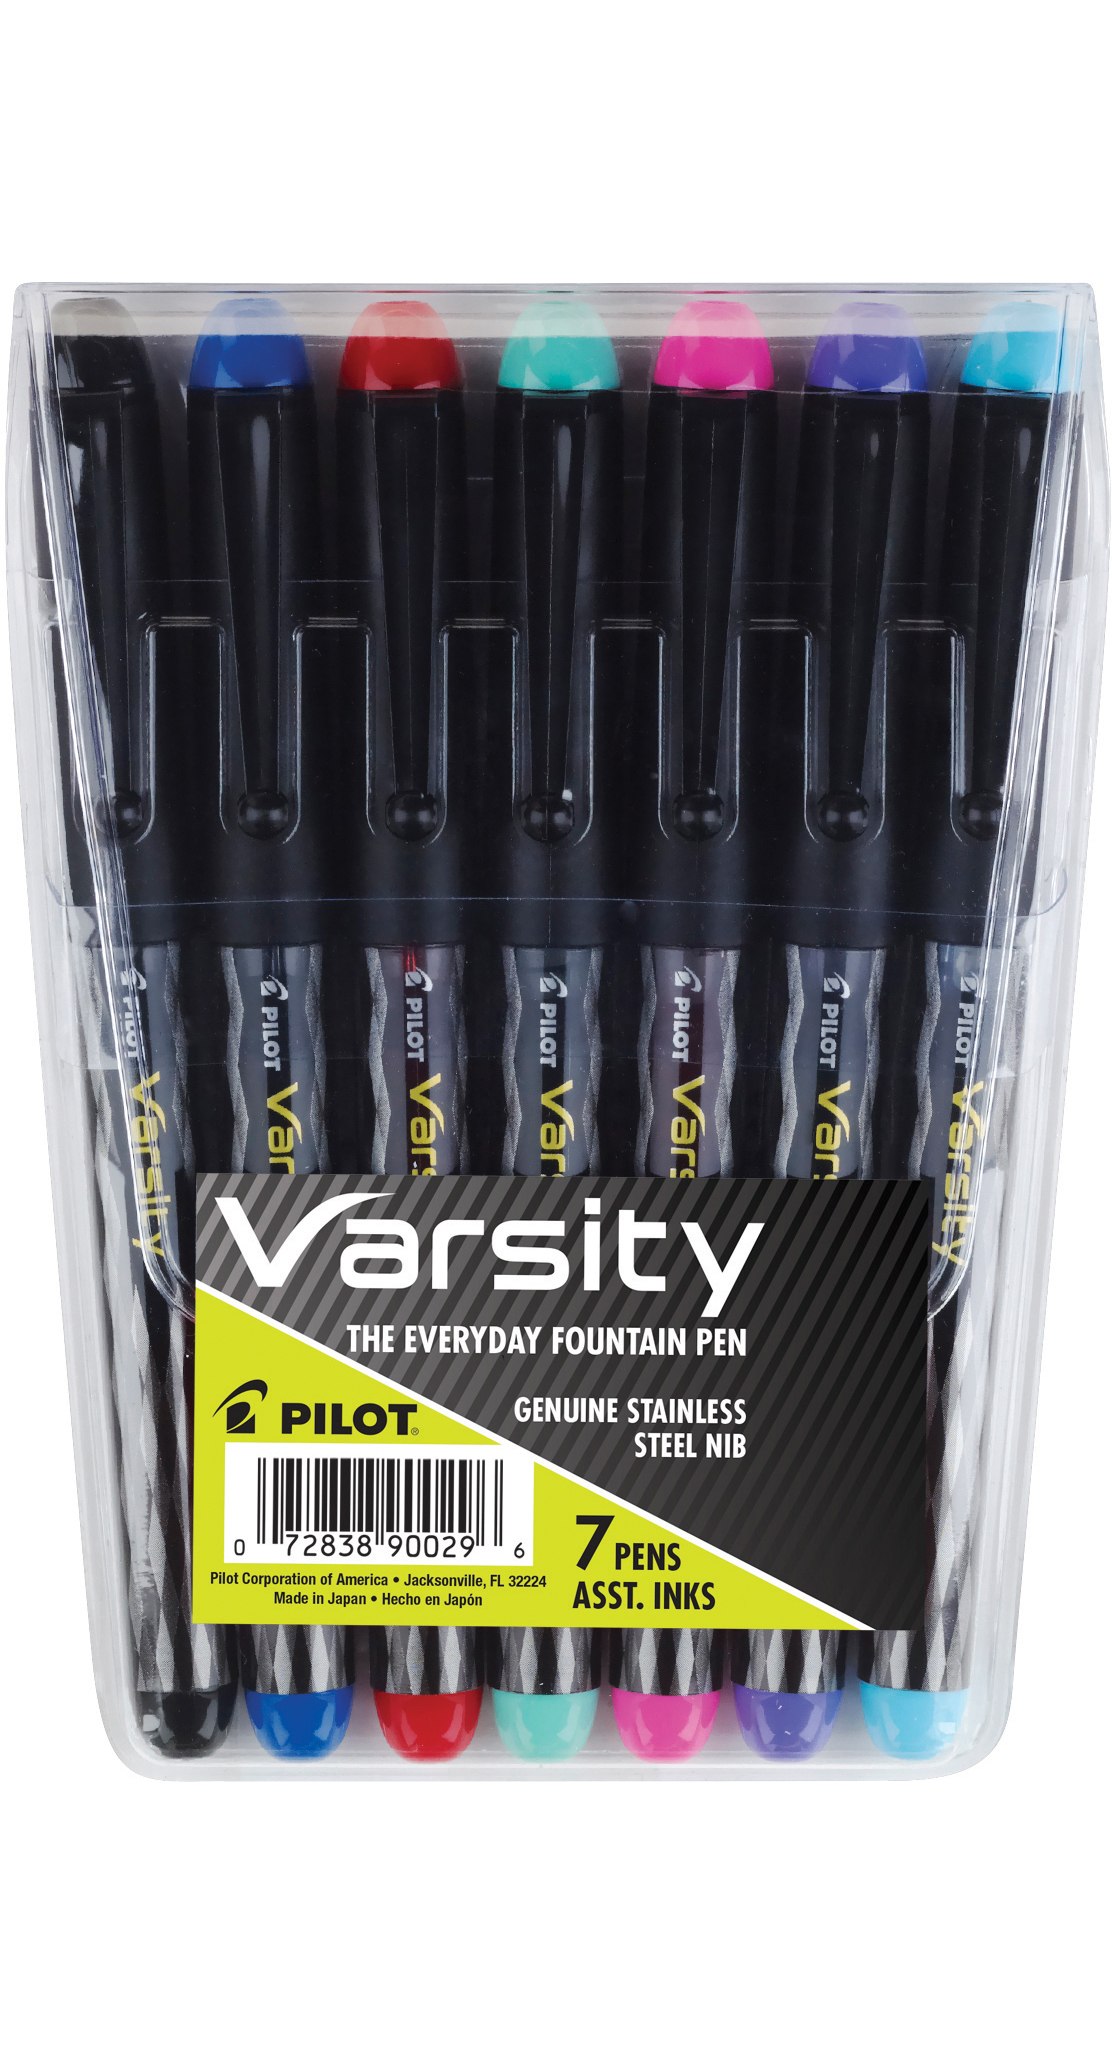 New In Box Pilot Varsity Black Ink Disposable Fountain Pen 90010 12 Pack